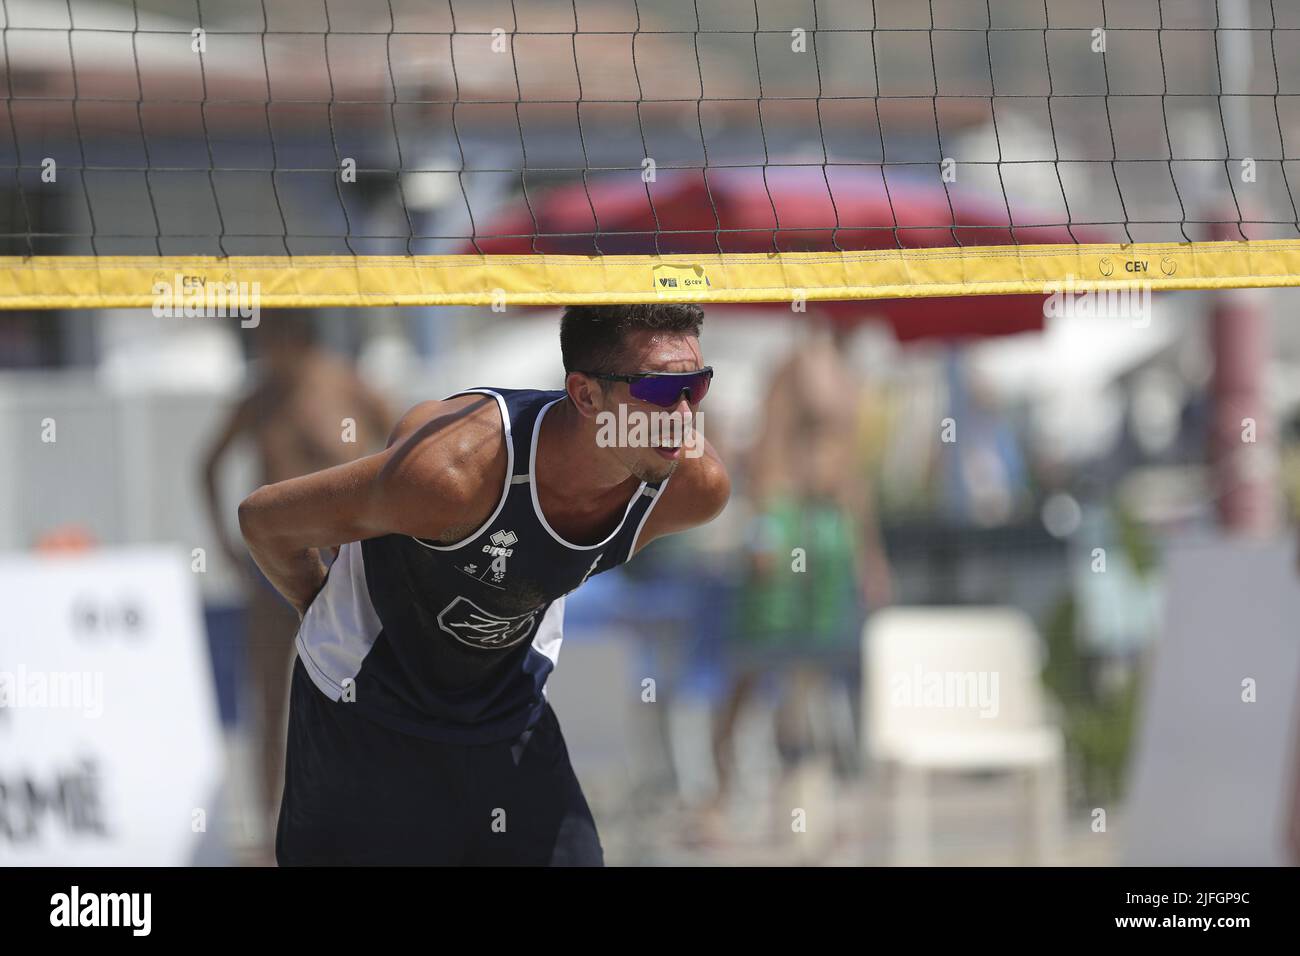 Giardini Naxos, Italy. 03rd July, 2022. Volleyball World Beach Pro Tour semifinal, Dal Corso (Italy) during Volleyball World Beach Pro Tour 2022, Beach Volley in Giardini Naxos, Italy, July 03 2022 Credit: Independent Photo Agency/Alamy Live News Stock Photo